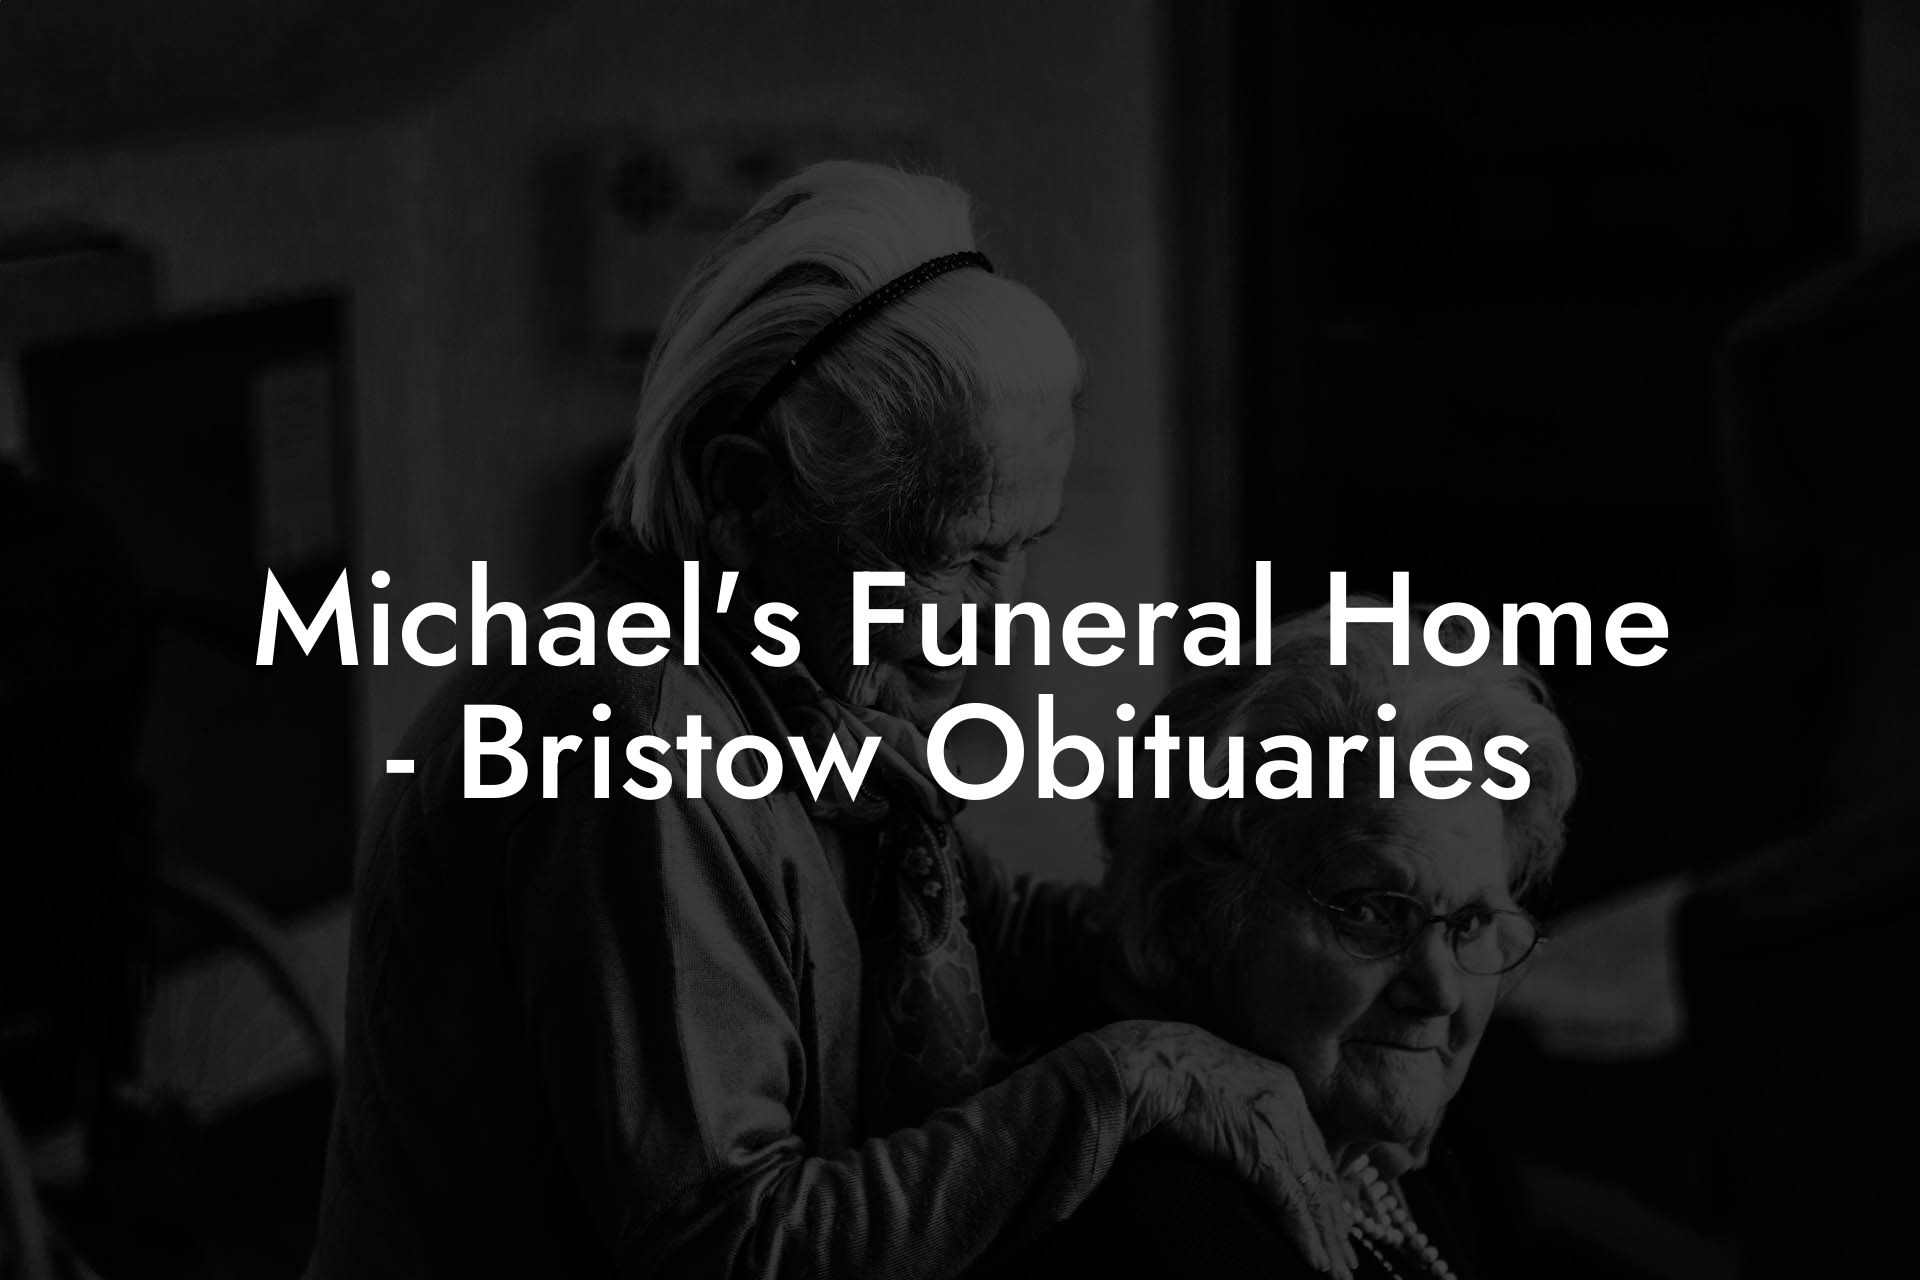 Michael's Funeral Home - Bristow Obituaries